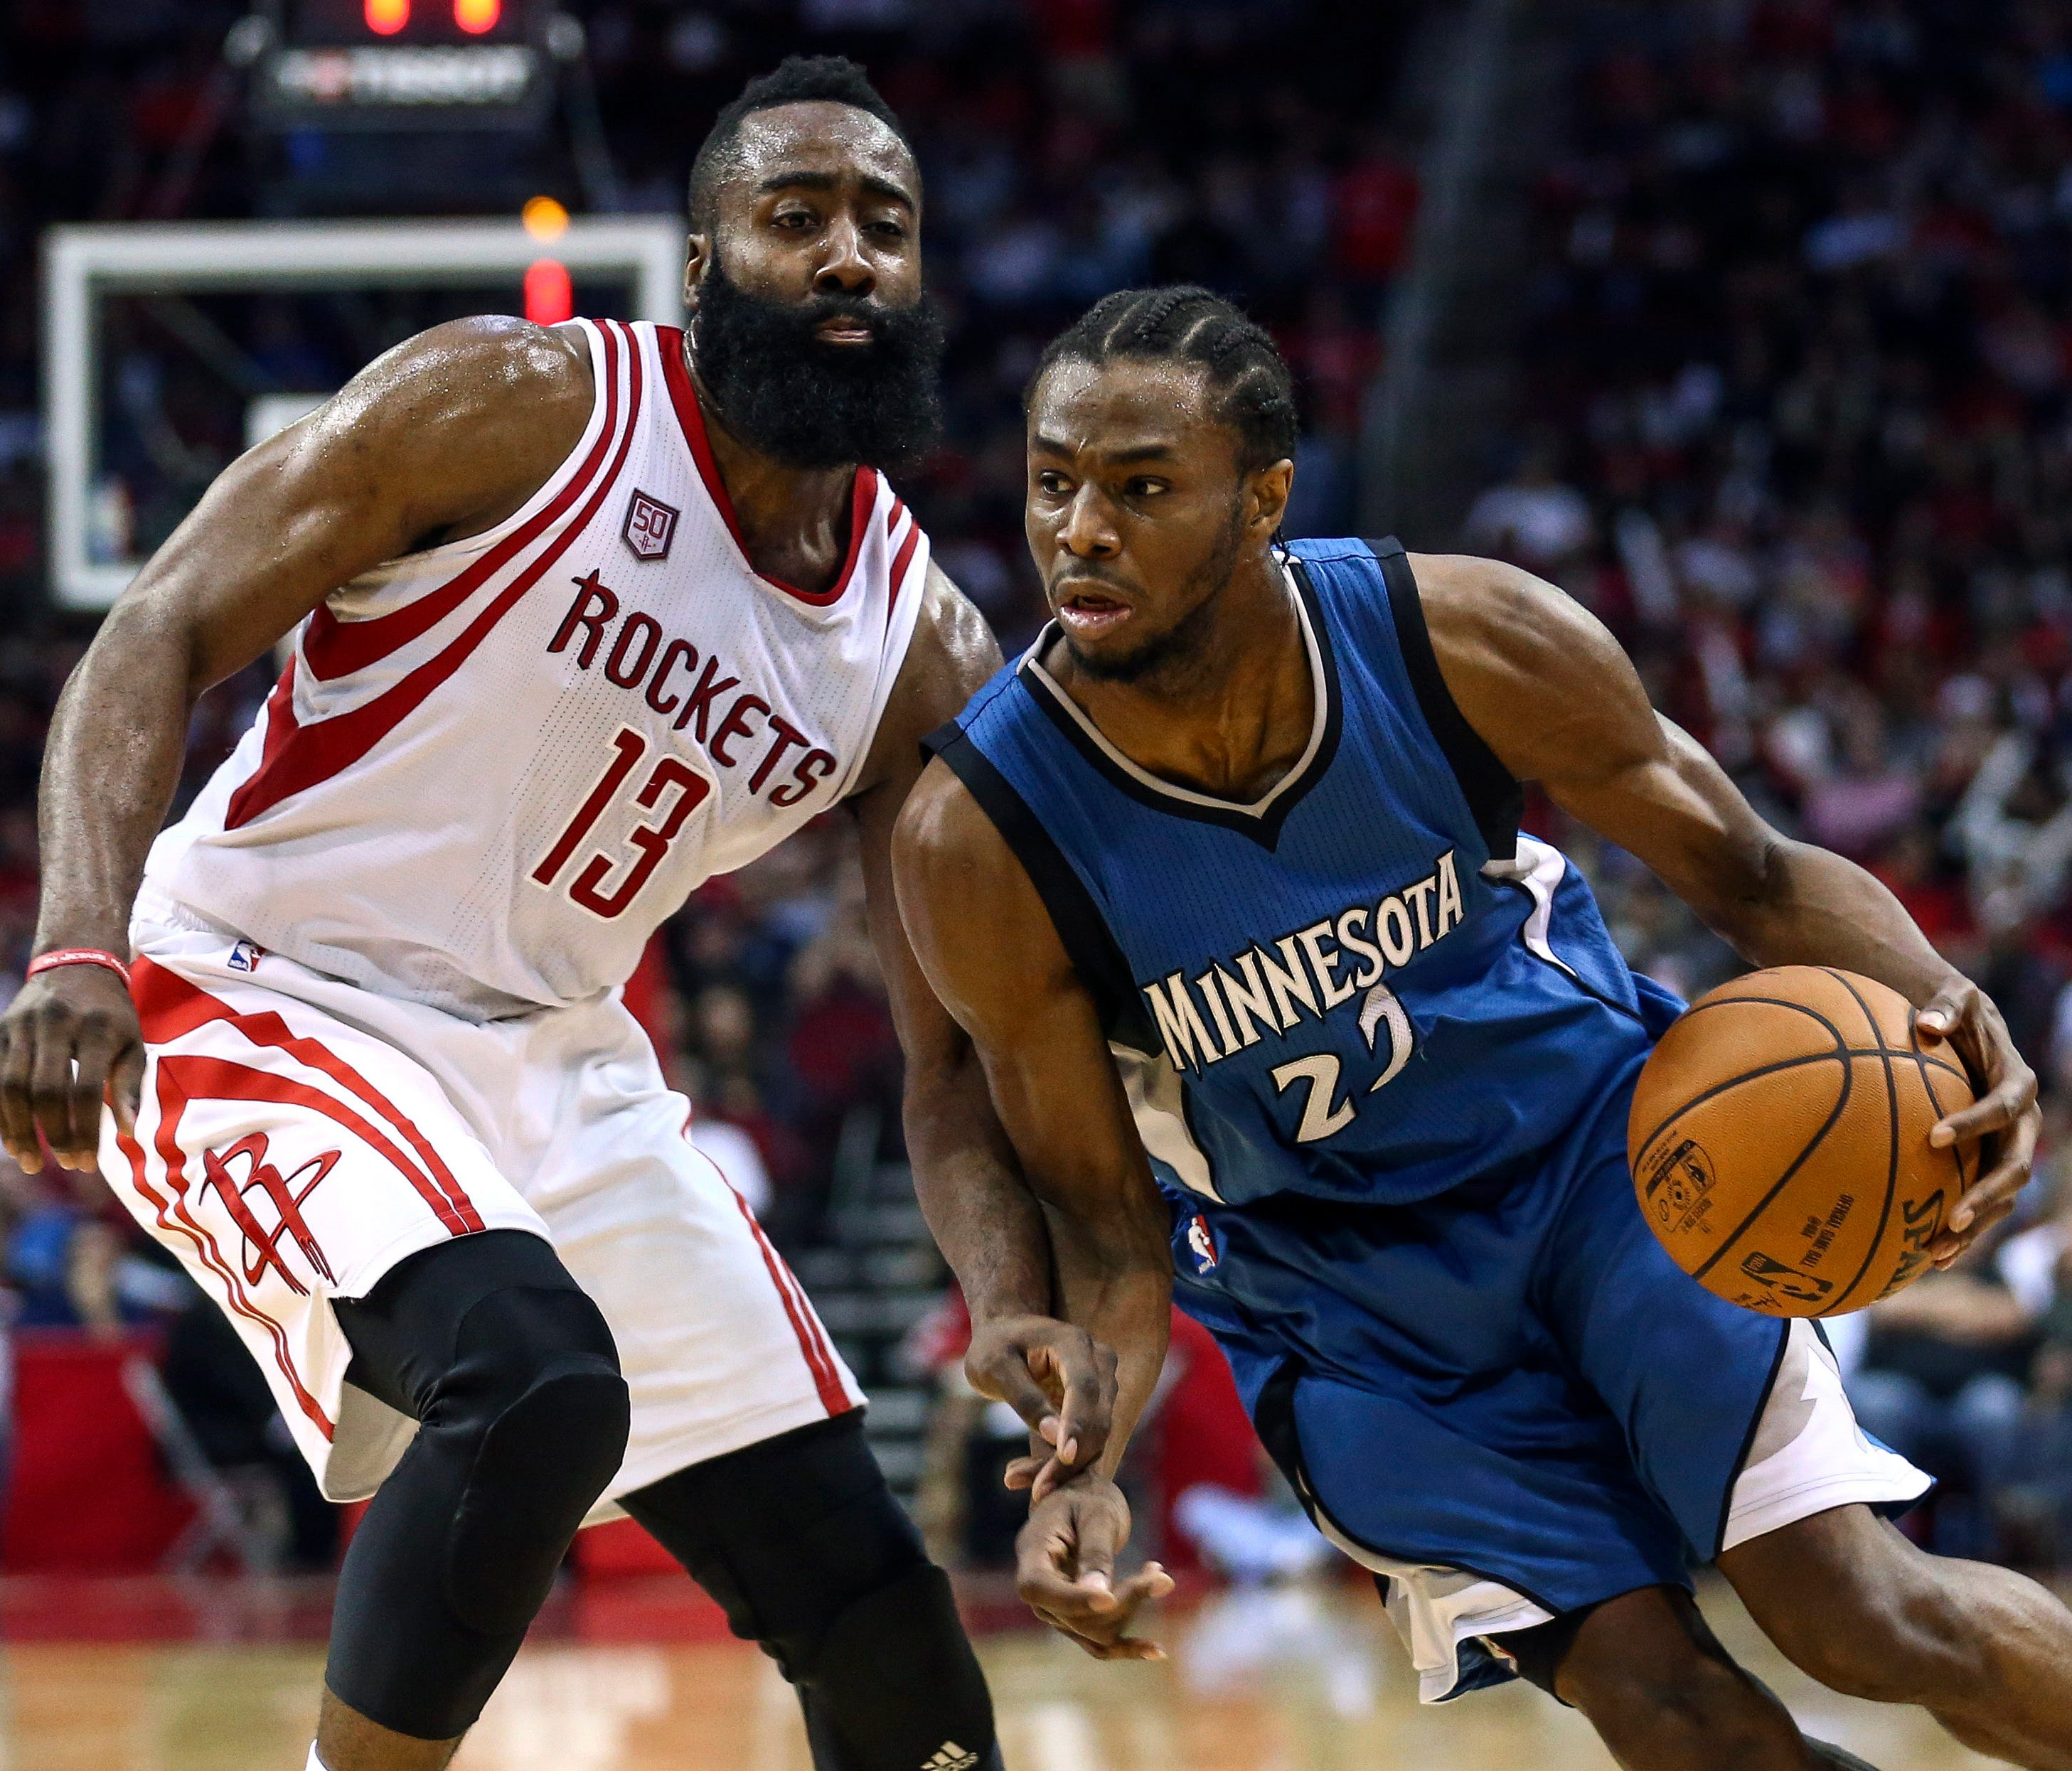 Minnesota Timberwolves forward Andrew Wiggins (22) attempts to drive the ball around Houston Rockets guard James Harden (13) during the third quarter at Toyota Center.